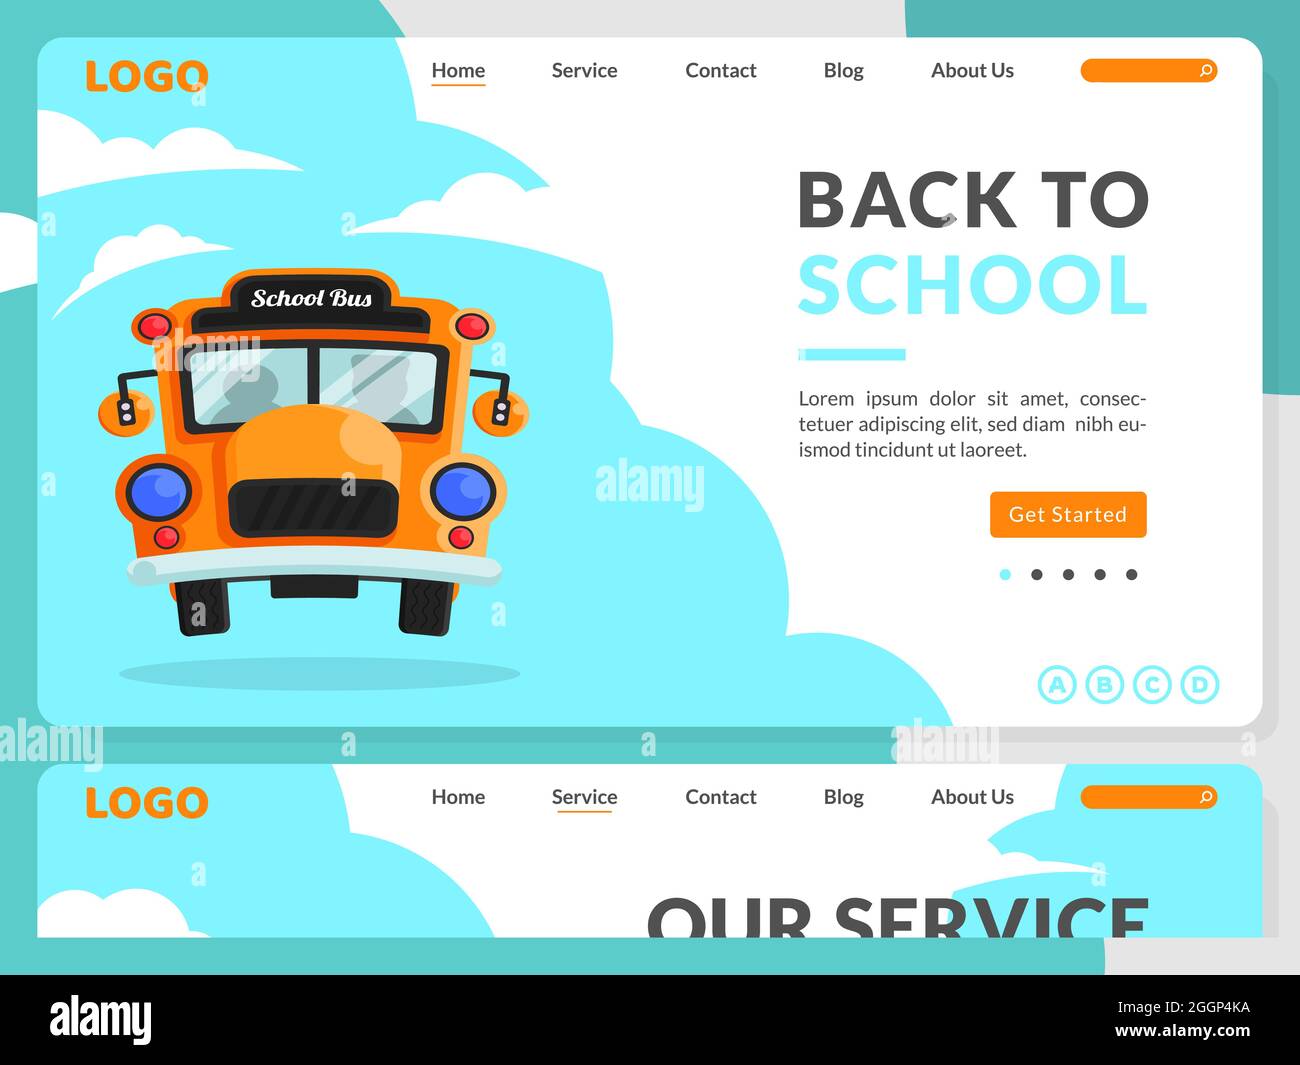 Back To School Landing Page Design Template Stock Vector